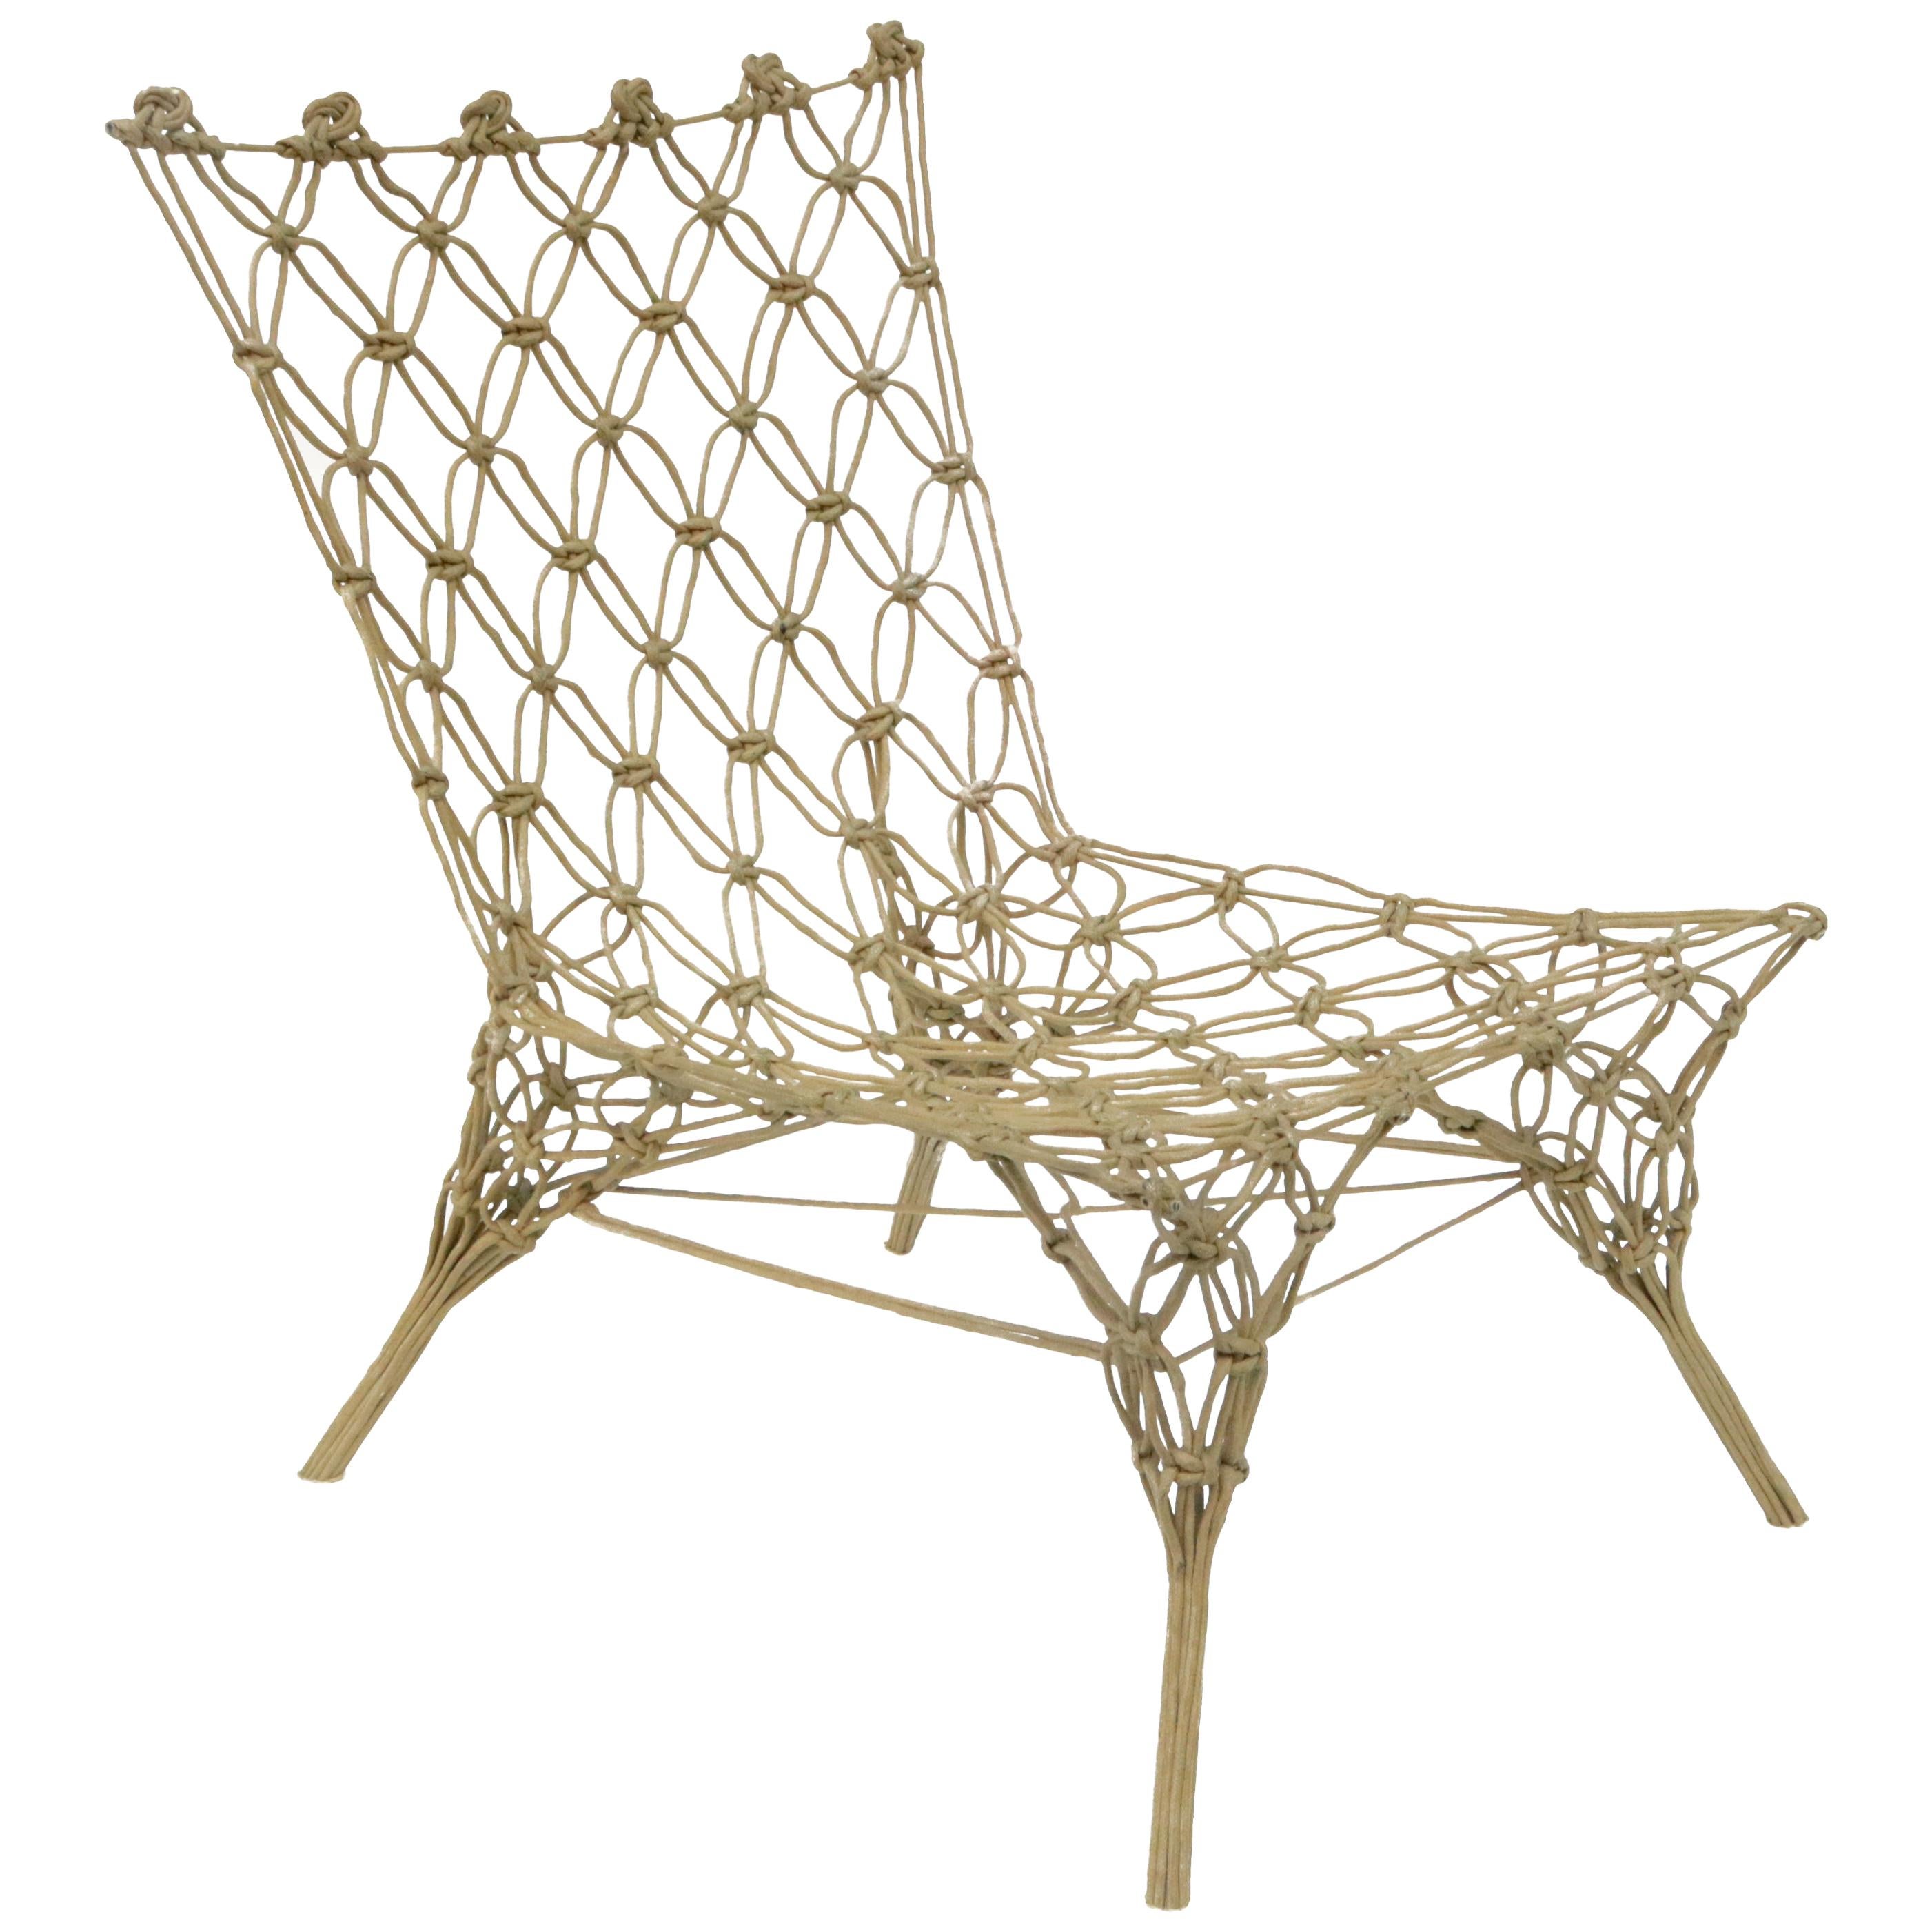 Knotted Chair" by Marcel Wanders For Sale at 1stDibs